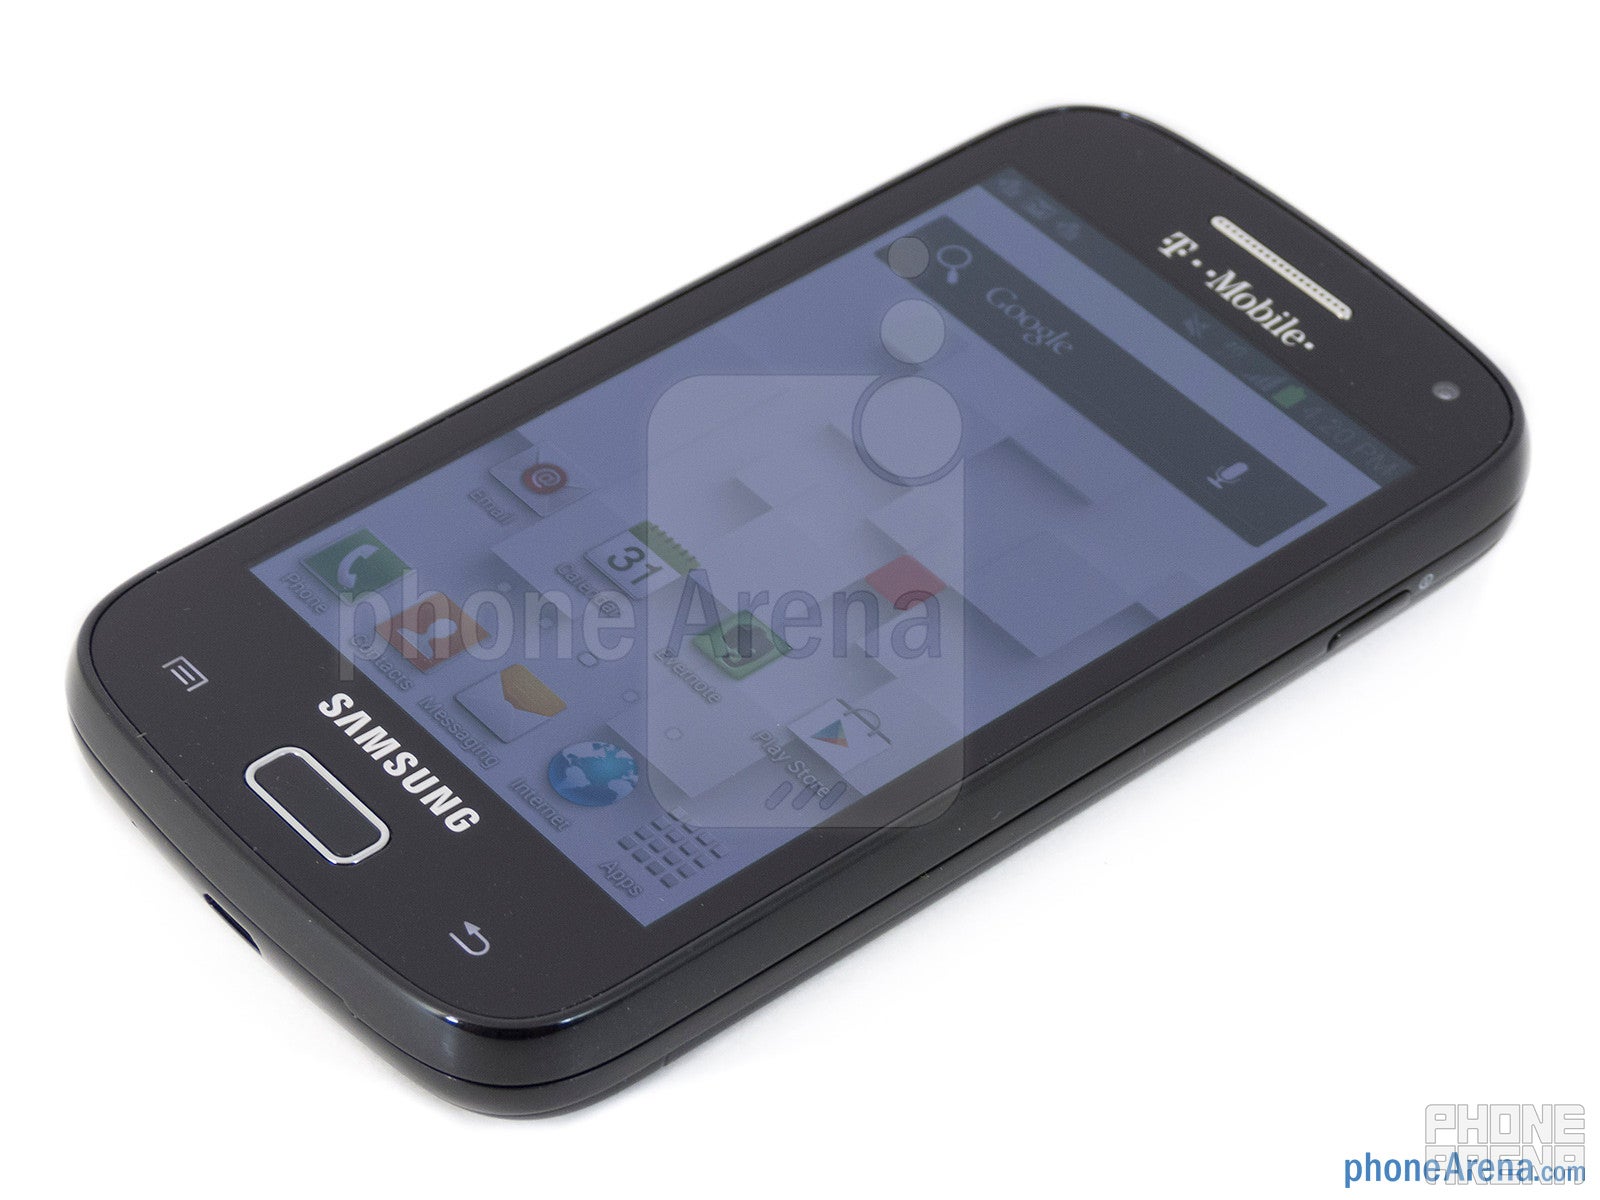 Samsung Galaxy S Relay 4G Review